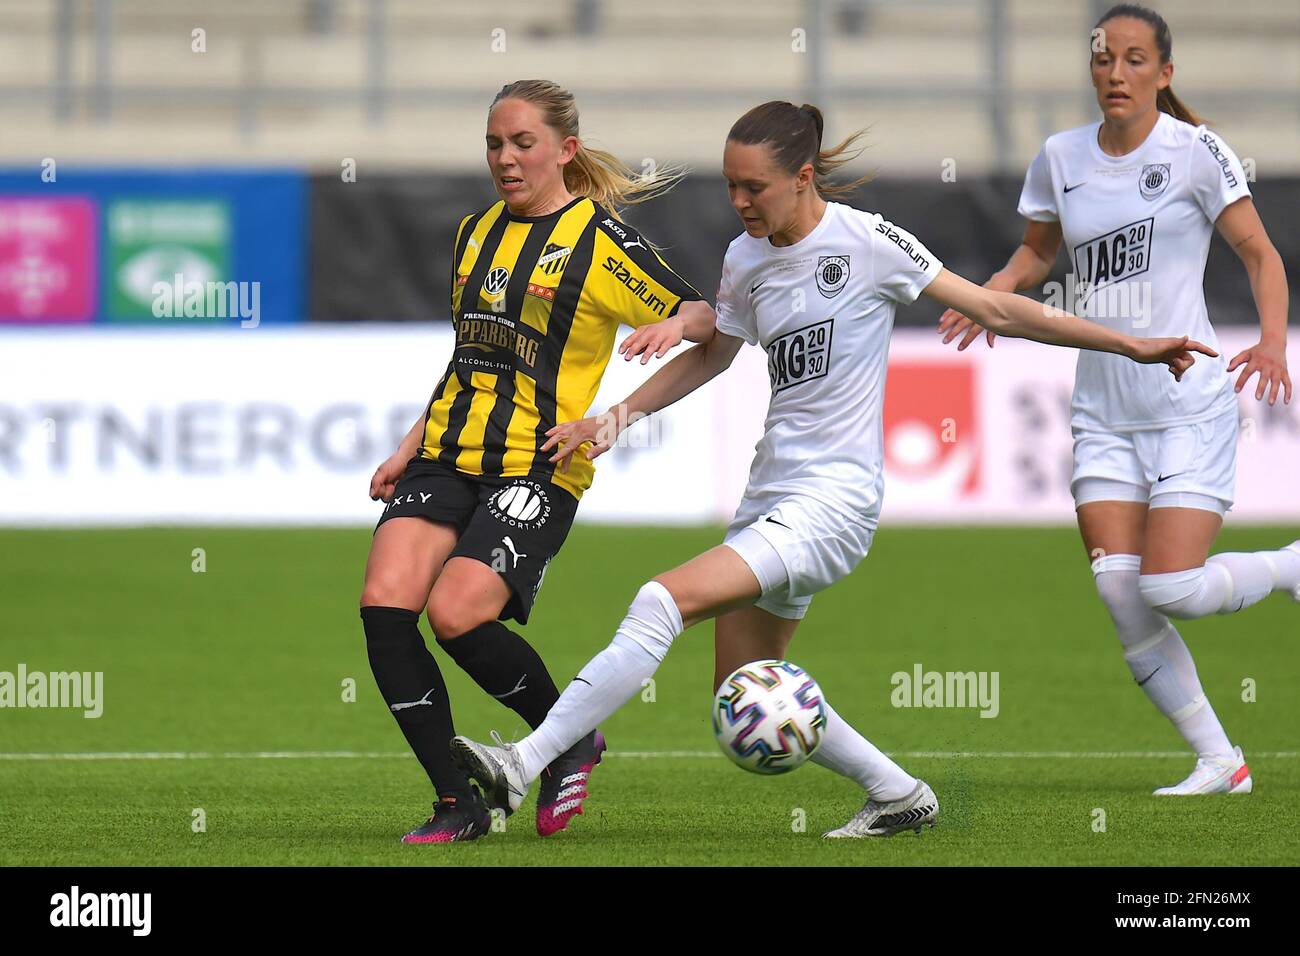 Gothenburg, Sweden. 13th May, 2021. Felicia Rogic (16 Eskilstuna) and Elin Rubensson (10 Hacken) during the final of the Swedish League Cup 2021 on May 13th 2021 between Hacken and Eskilstuna at Bravida Arena in Gothenburg, Sweden Credit: SPP Sport Press Photo. /Alamy Live News Stock Photo